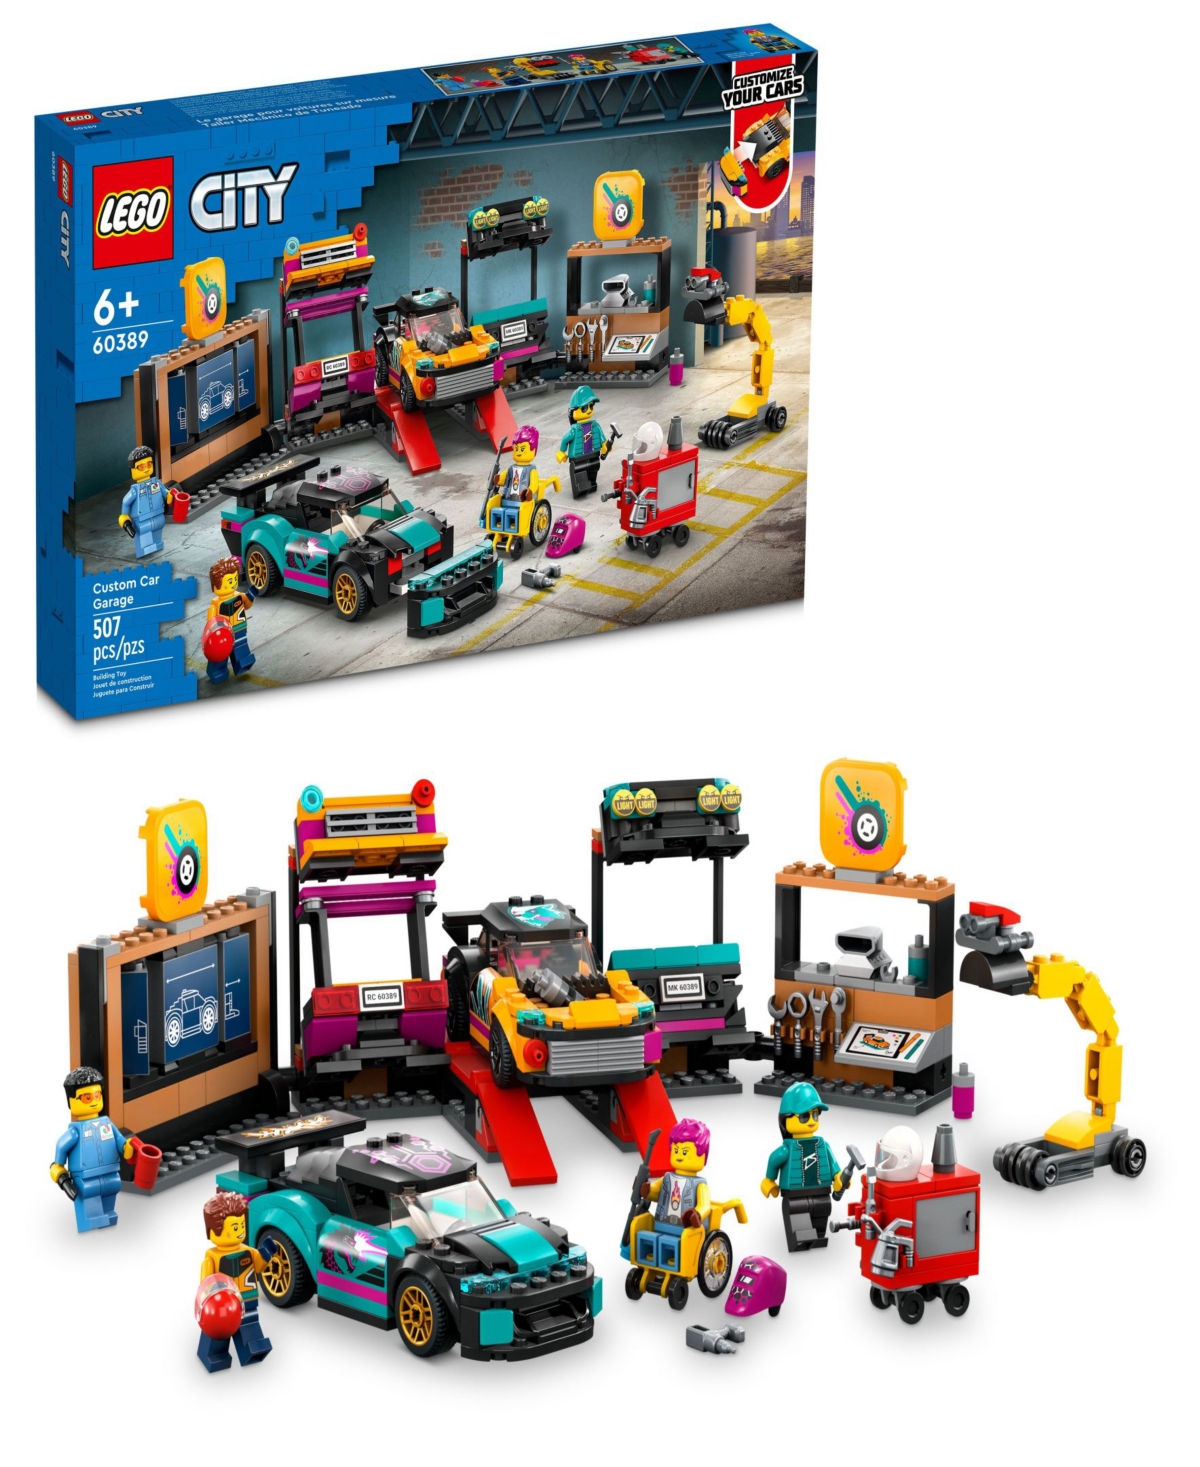 Lego City Great Vehicles Custom Car Garage 60389 Toy Building Set With 2 Mechanic And 2 Driver Minifigure In Multicolor